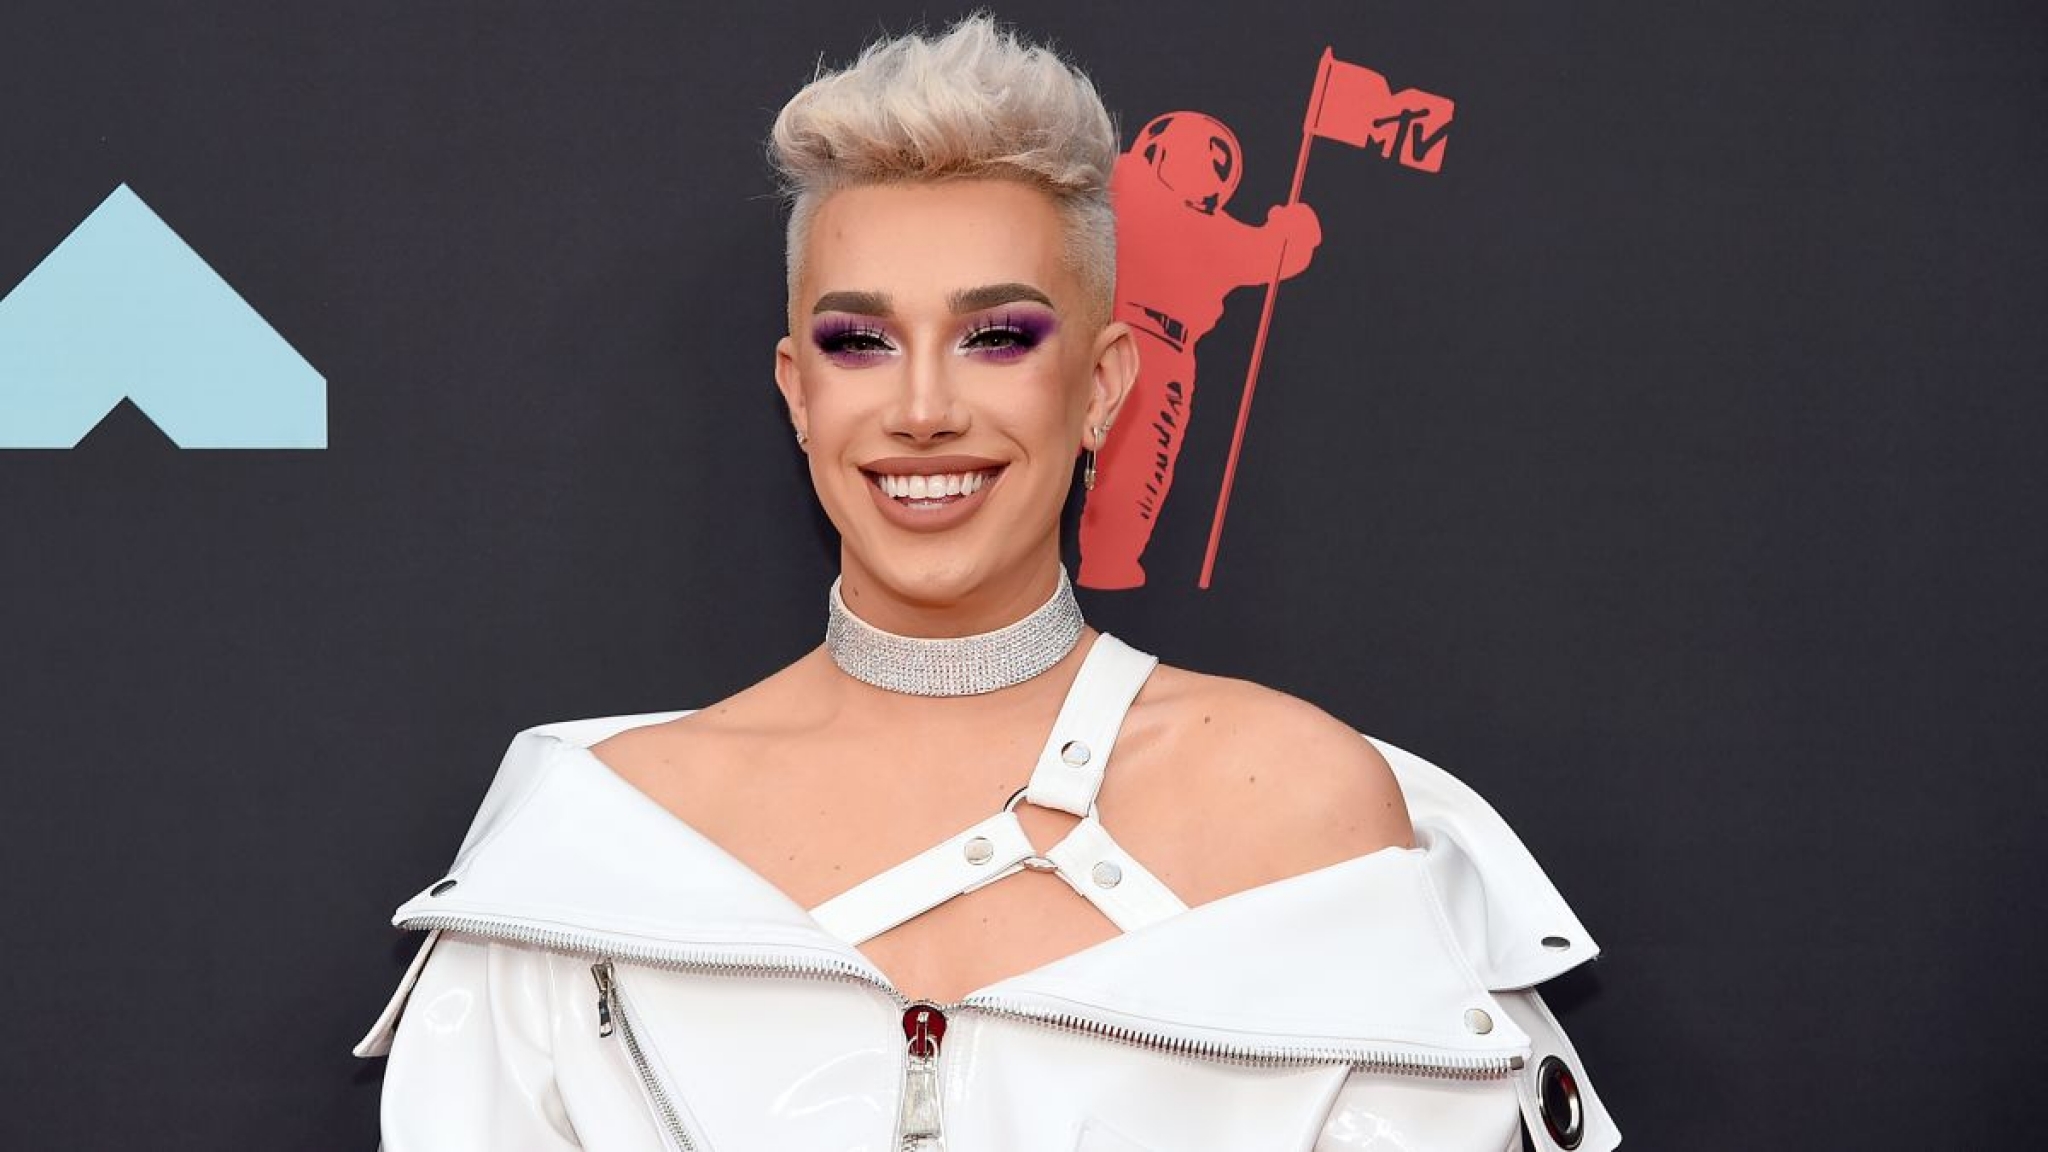 James Charles’ YouTube Channel Has Been Demonetized Amid Allegations He Sexted With Minors